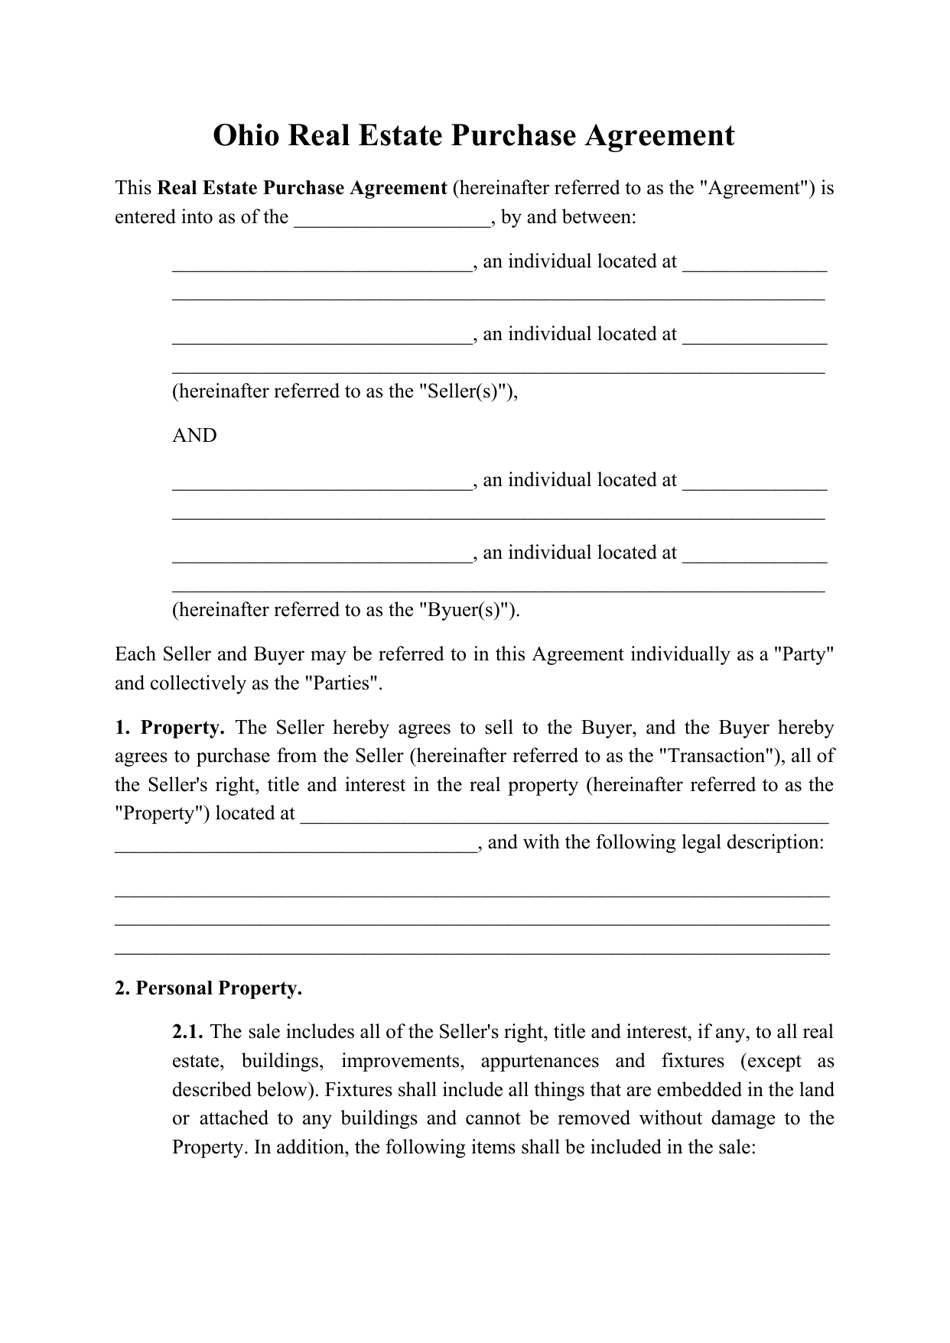 Ohio Real Estate Purchase Agreement Template Fill Out, Sign Online